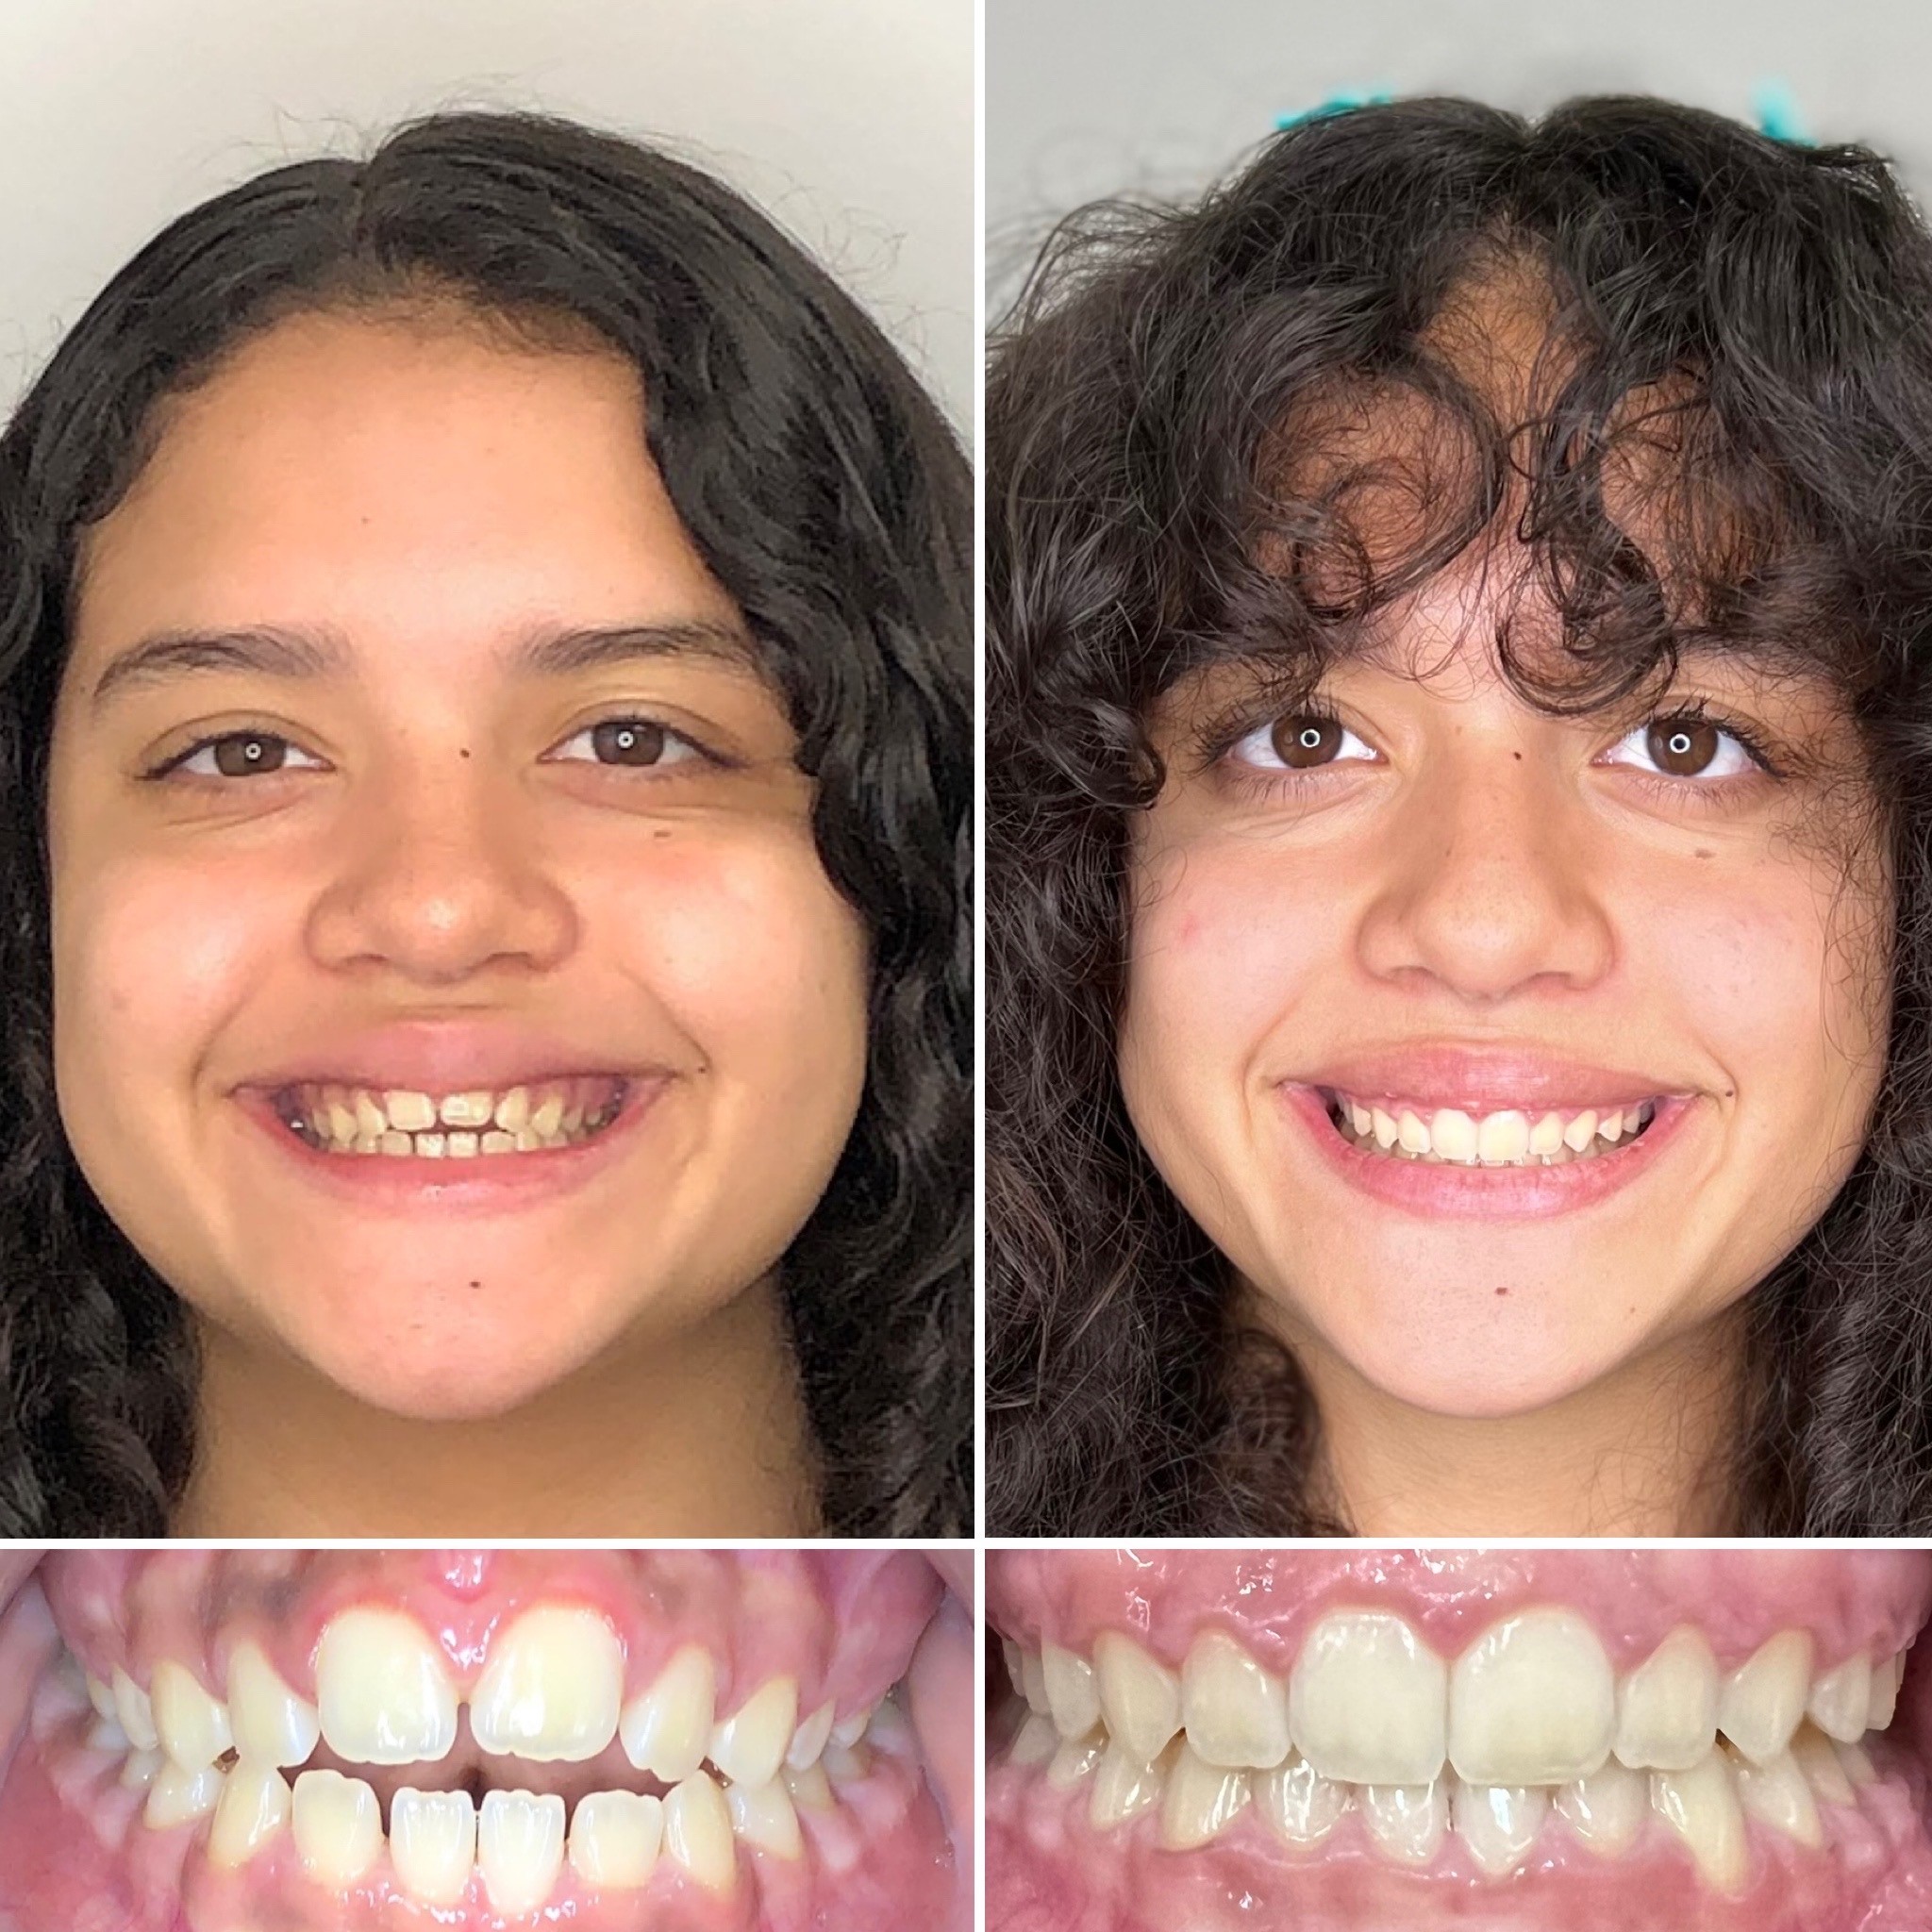 TruSmile - Before and After Orthodontic Treatment